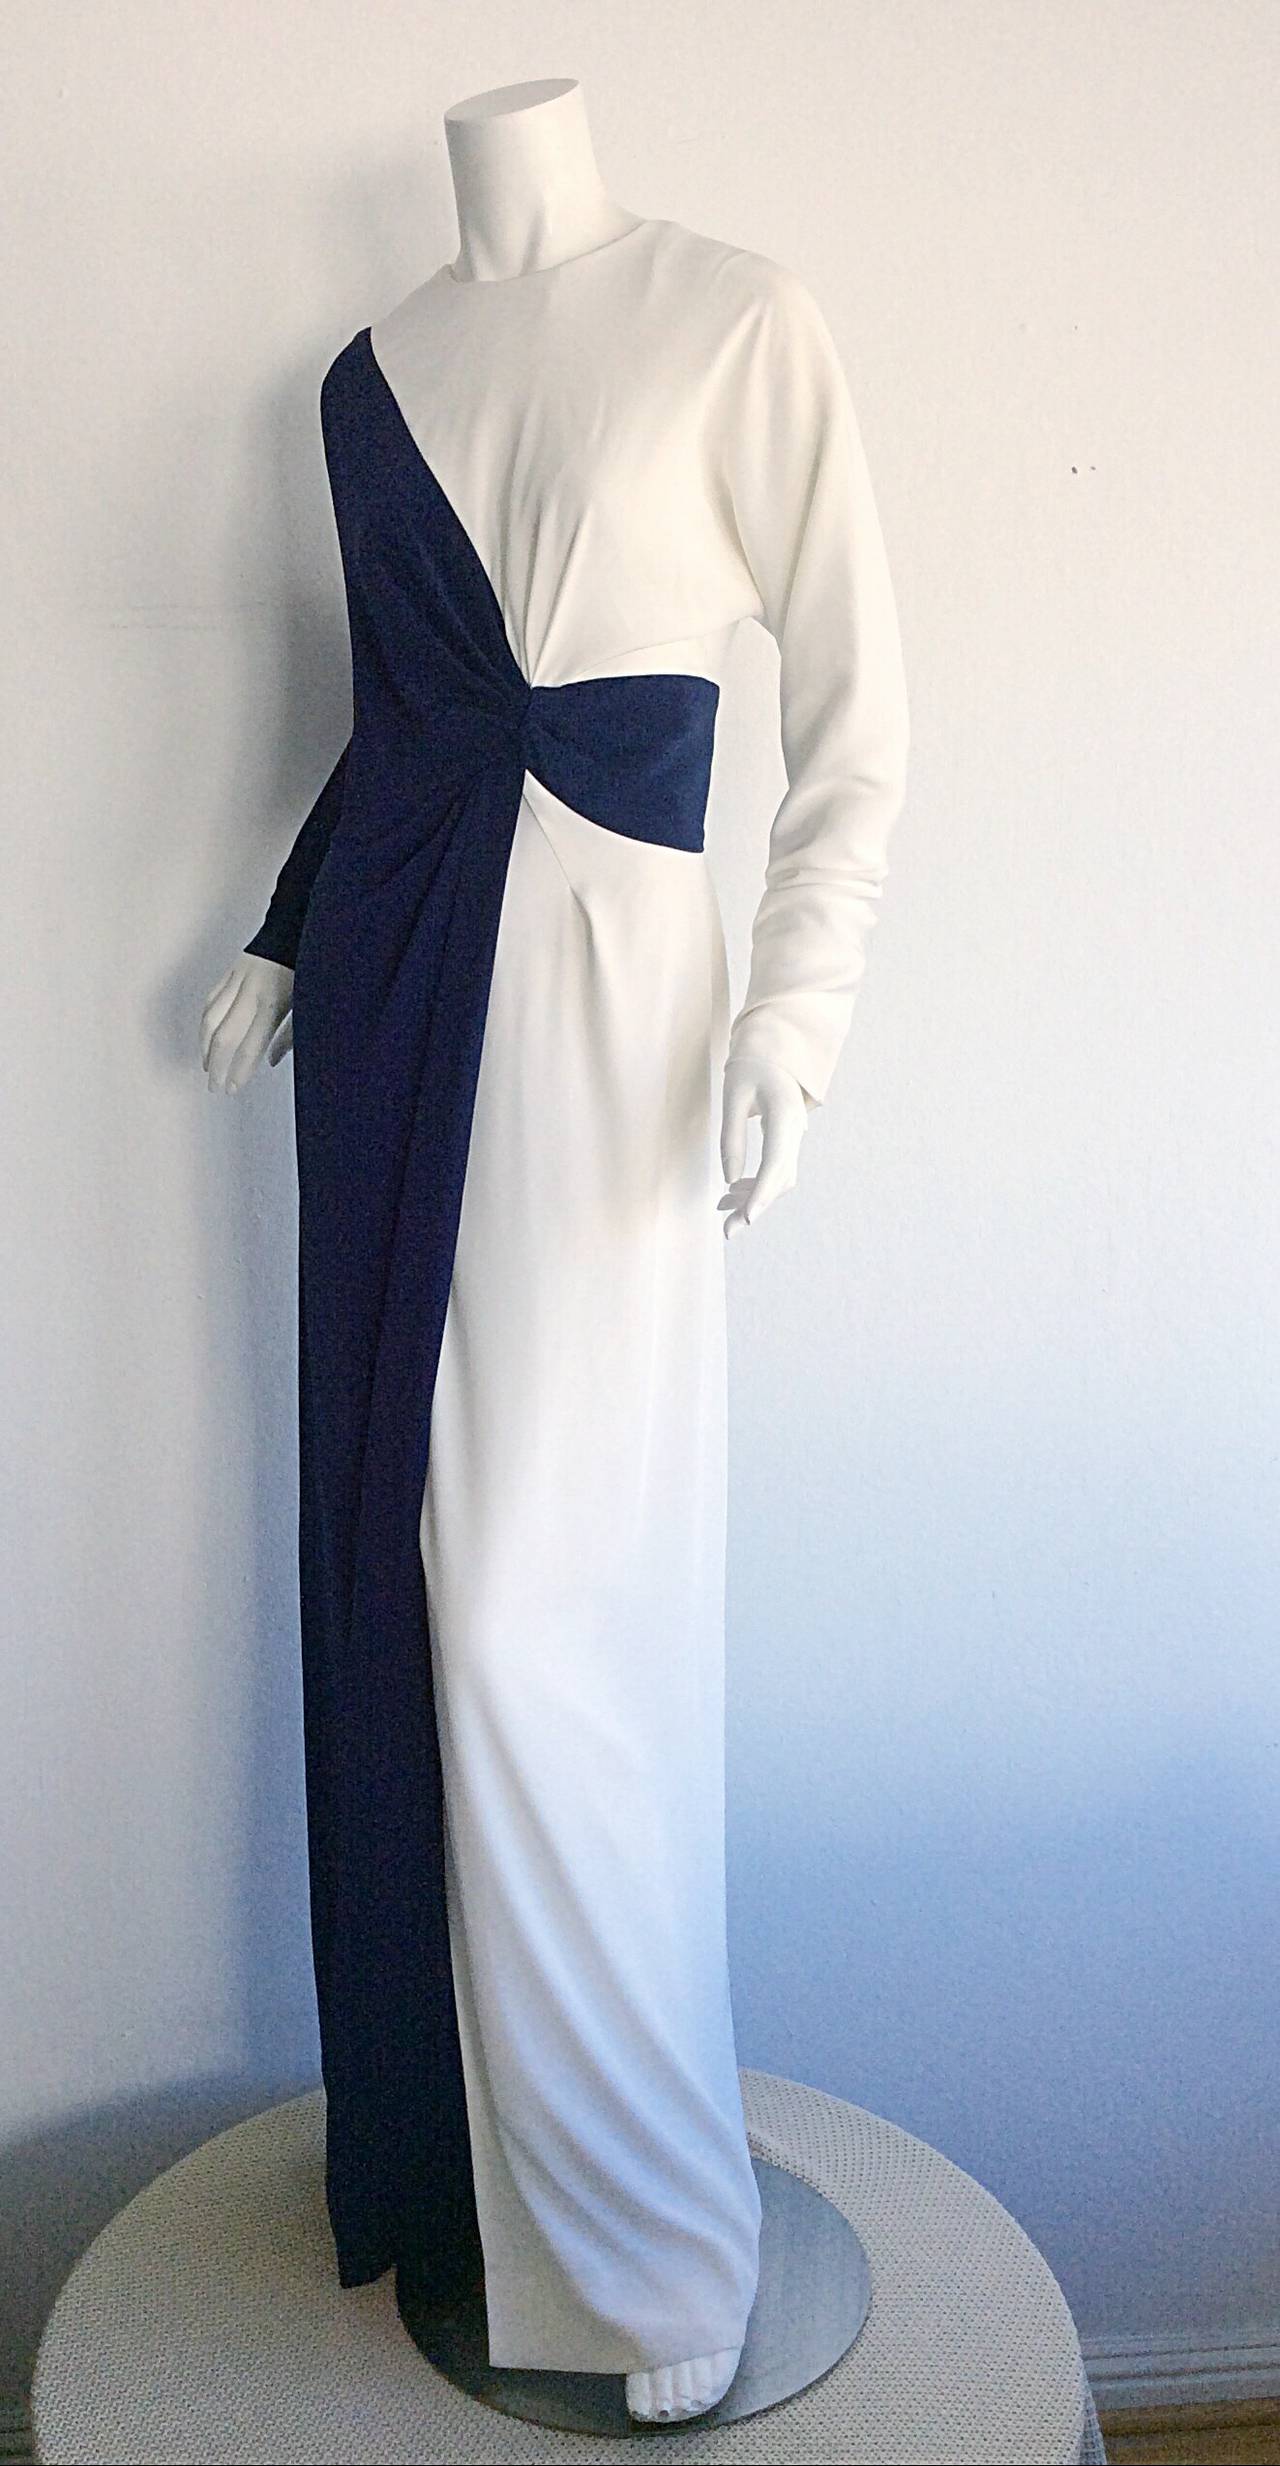 Beautiful, unique vintage Bob Mackie navy & white gown! Slight dolman sleeves. Wonderful lines make this a must have gown! Fully lined. In great condition. Approximately Size Small - Medium

Measurements:
Up to 44 inch bust (dolman sleeves)
30